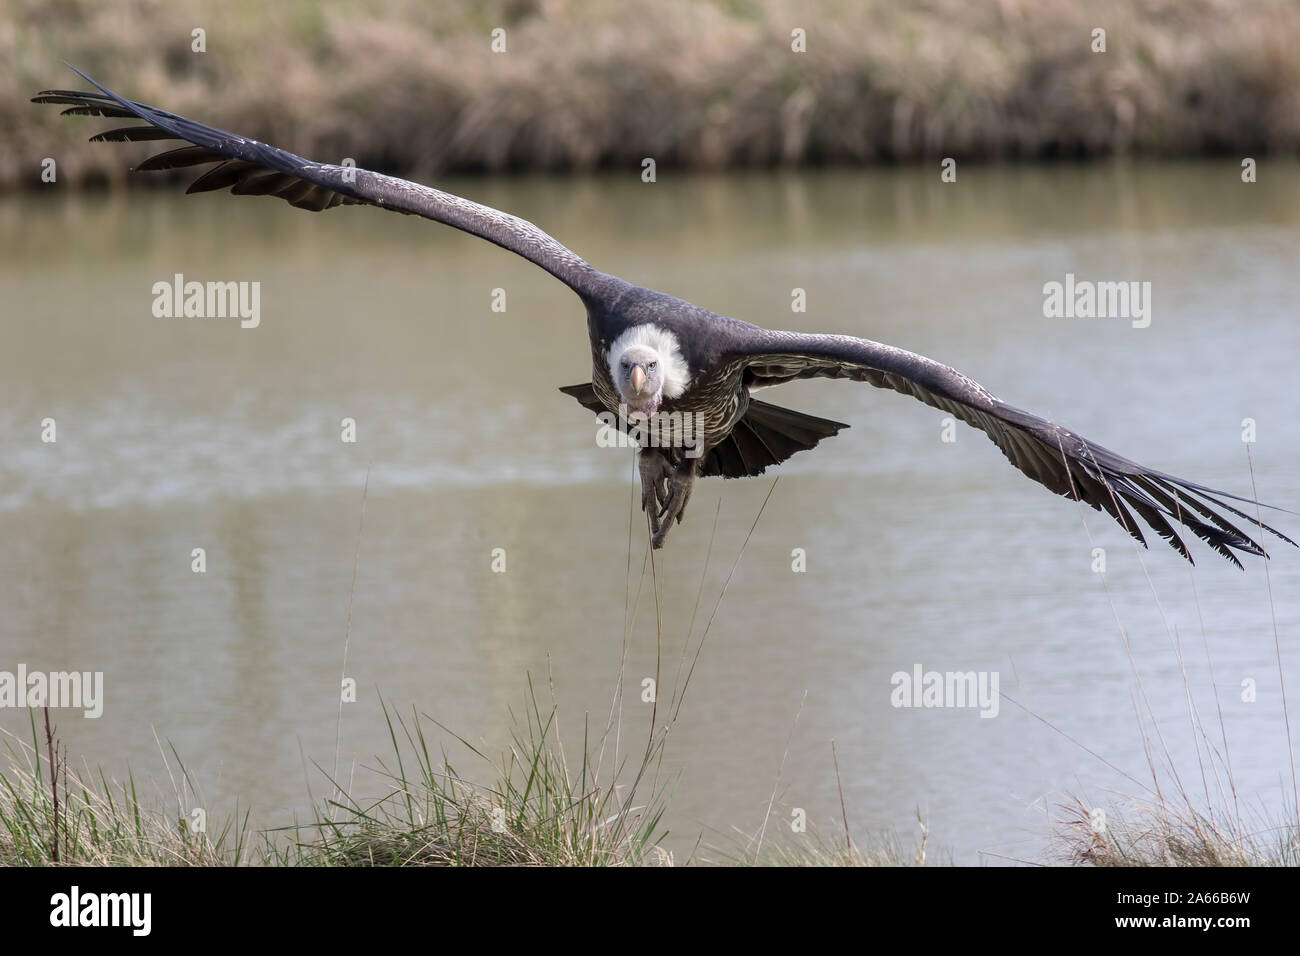 Vulture in flight. Ruppells griffon vulture (Gyps rueppelli) scavenger bird flying towards camera. Vulture with wings outstretched facing camera in lo Stock Photo